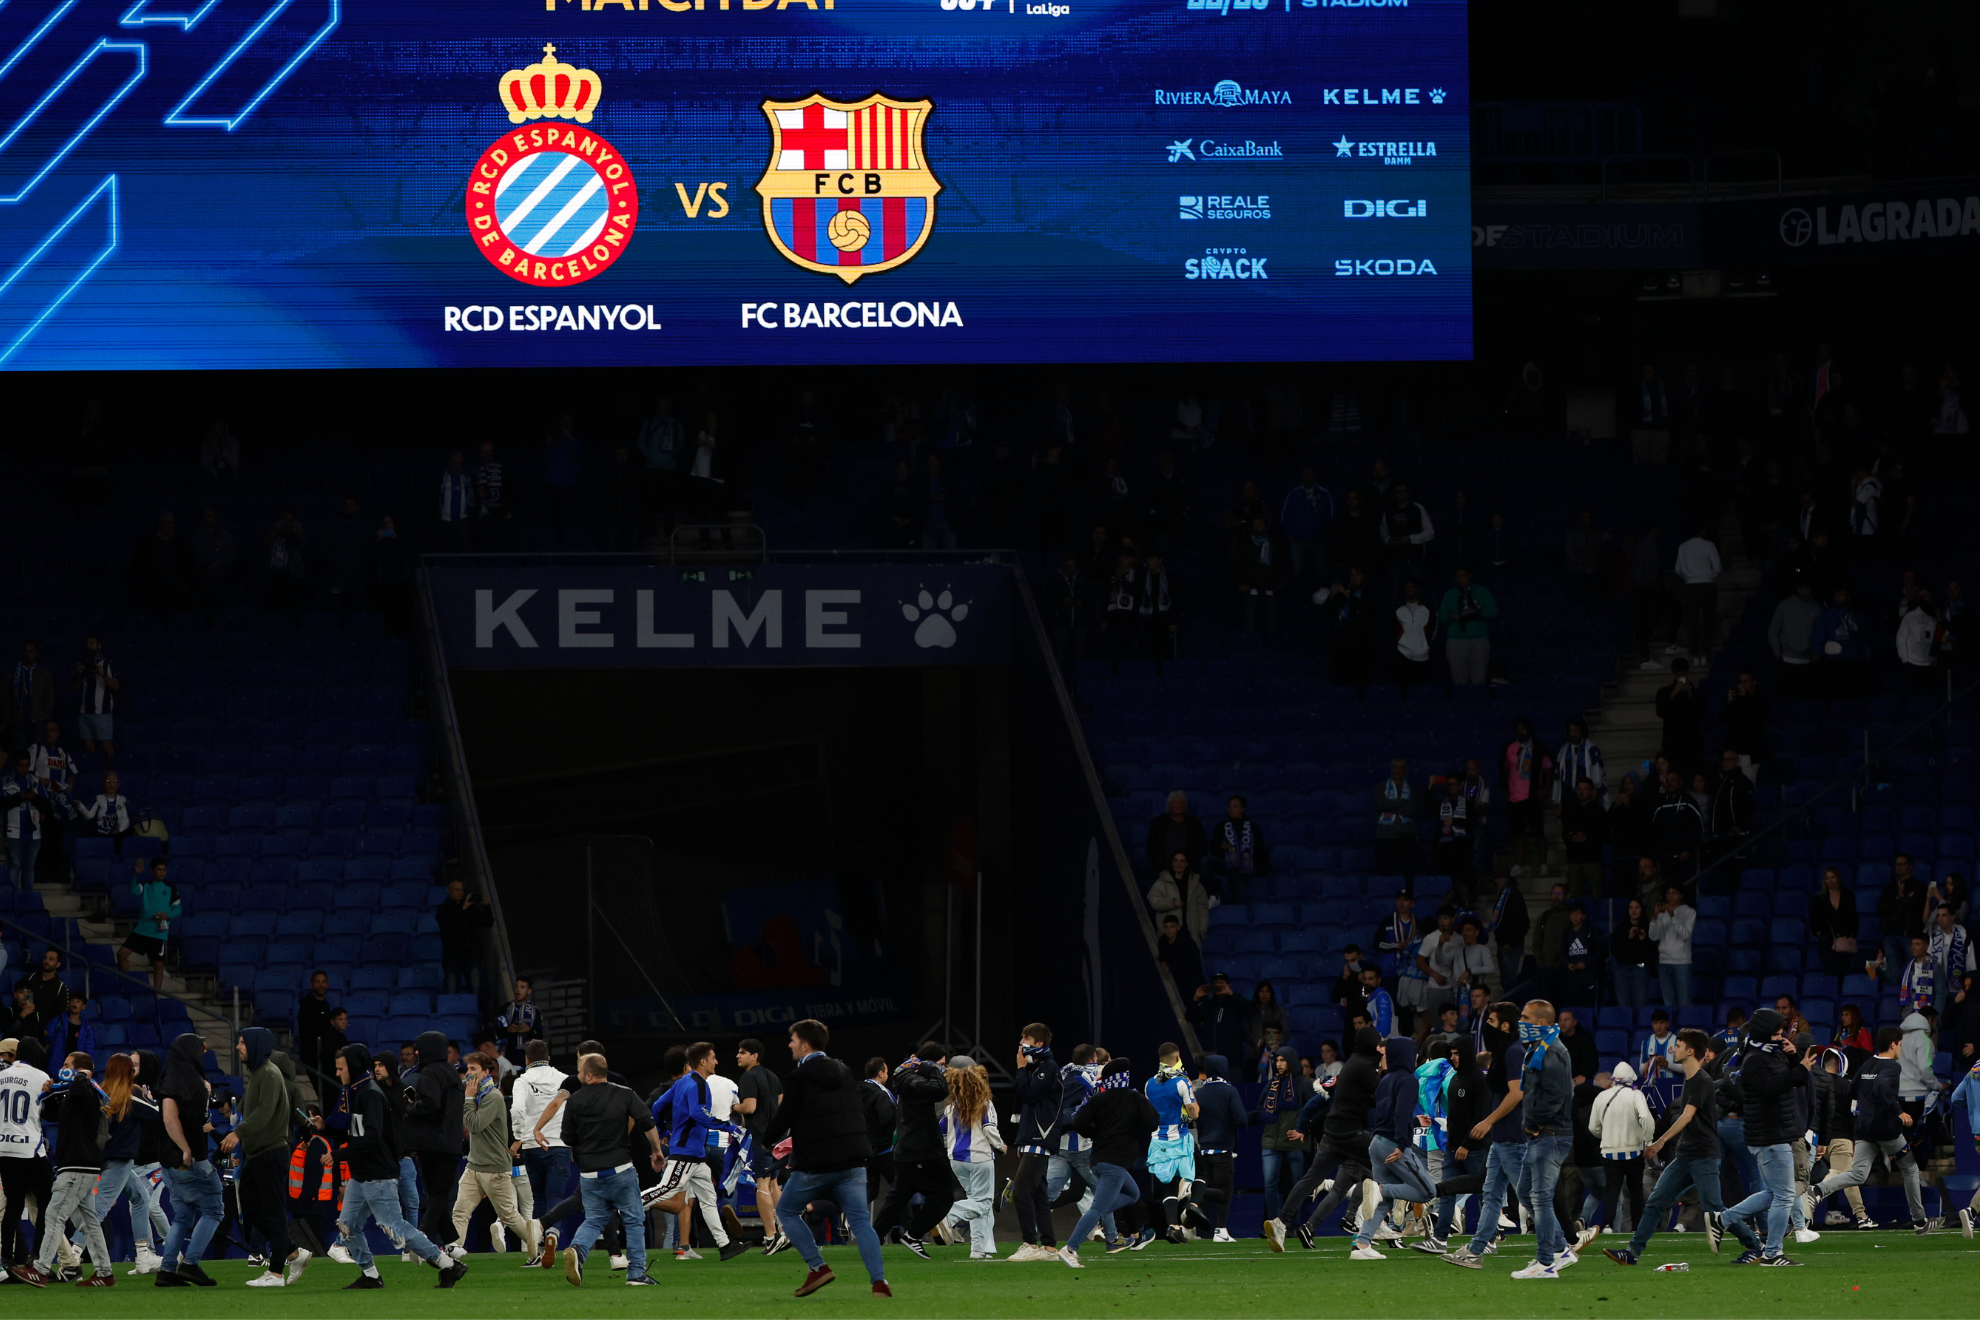 Espanyol fans invaded the RCDE Stadium pitch after full time on Sunday.